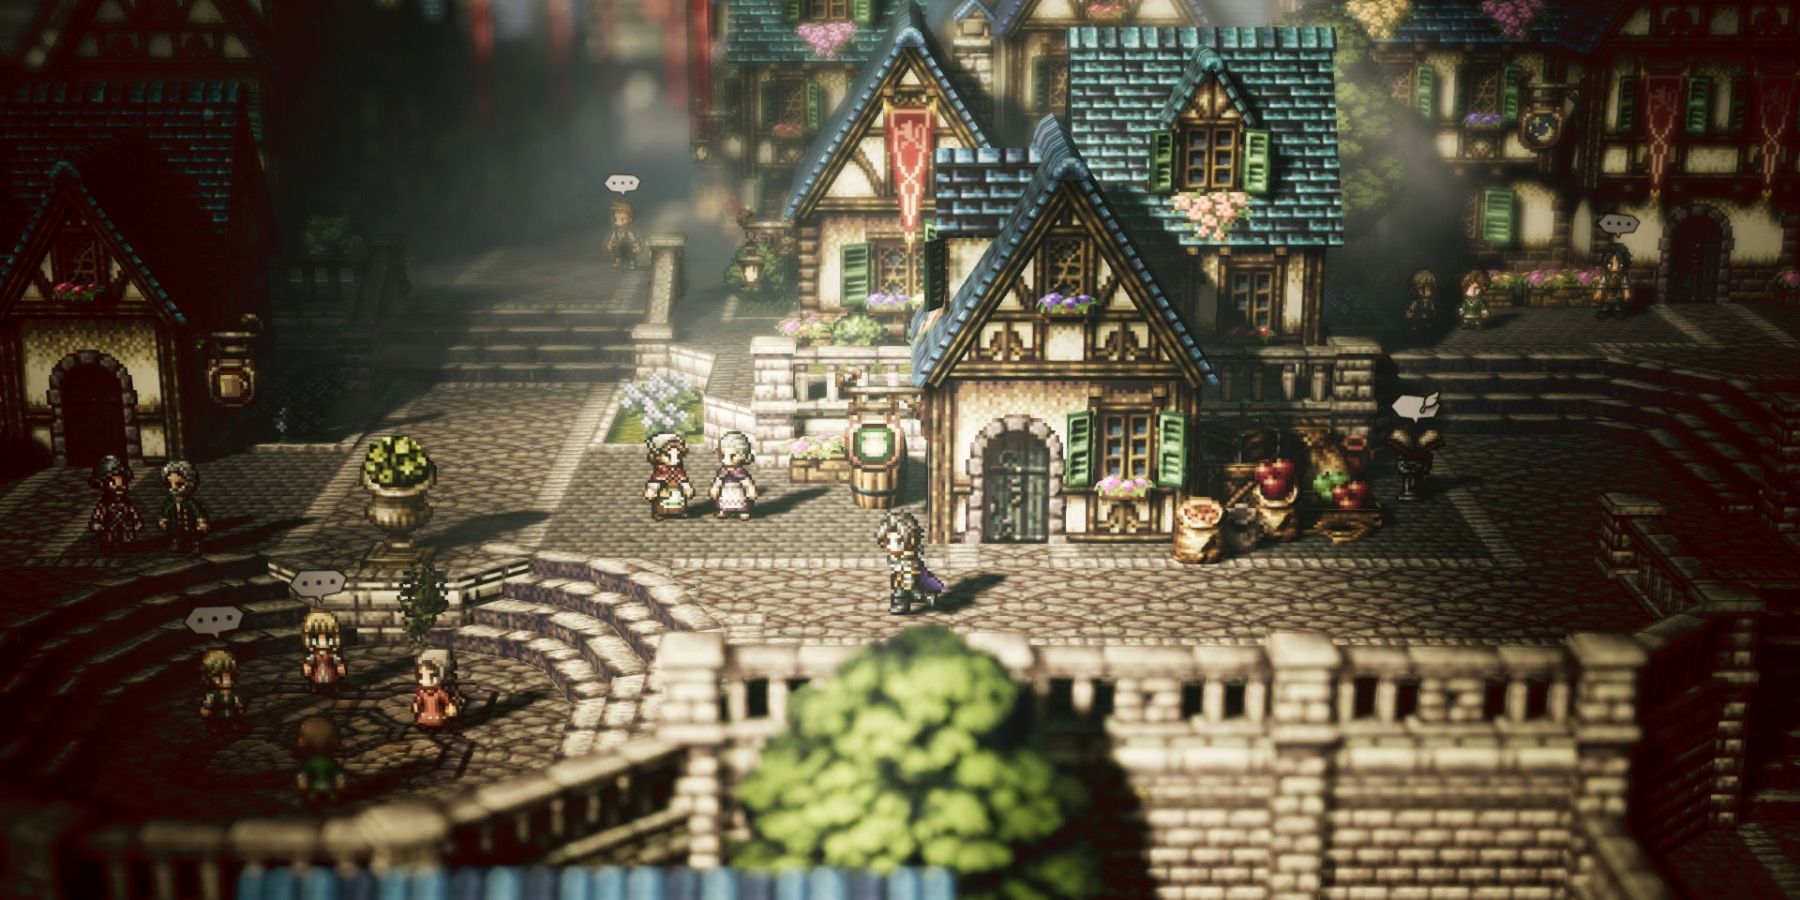 A screenshot showing one of the towns in Octopath Traveler.